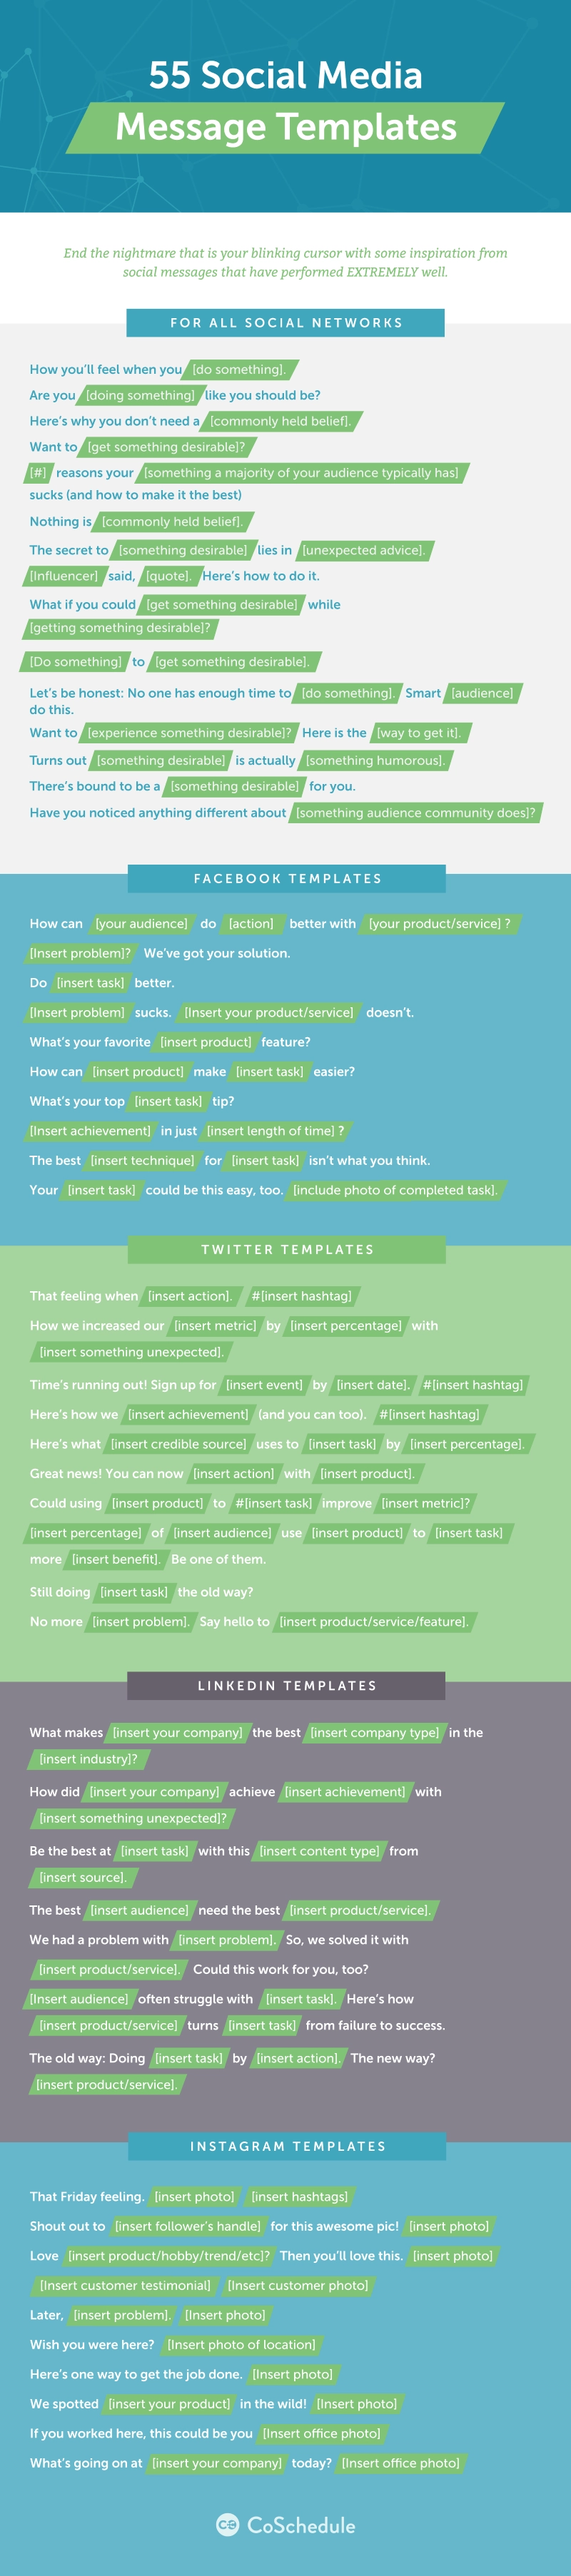 55 Social Post templates infographic